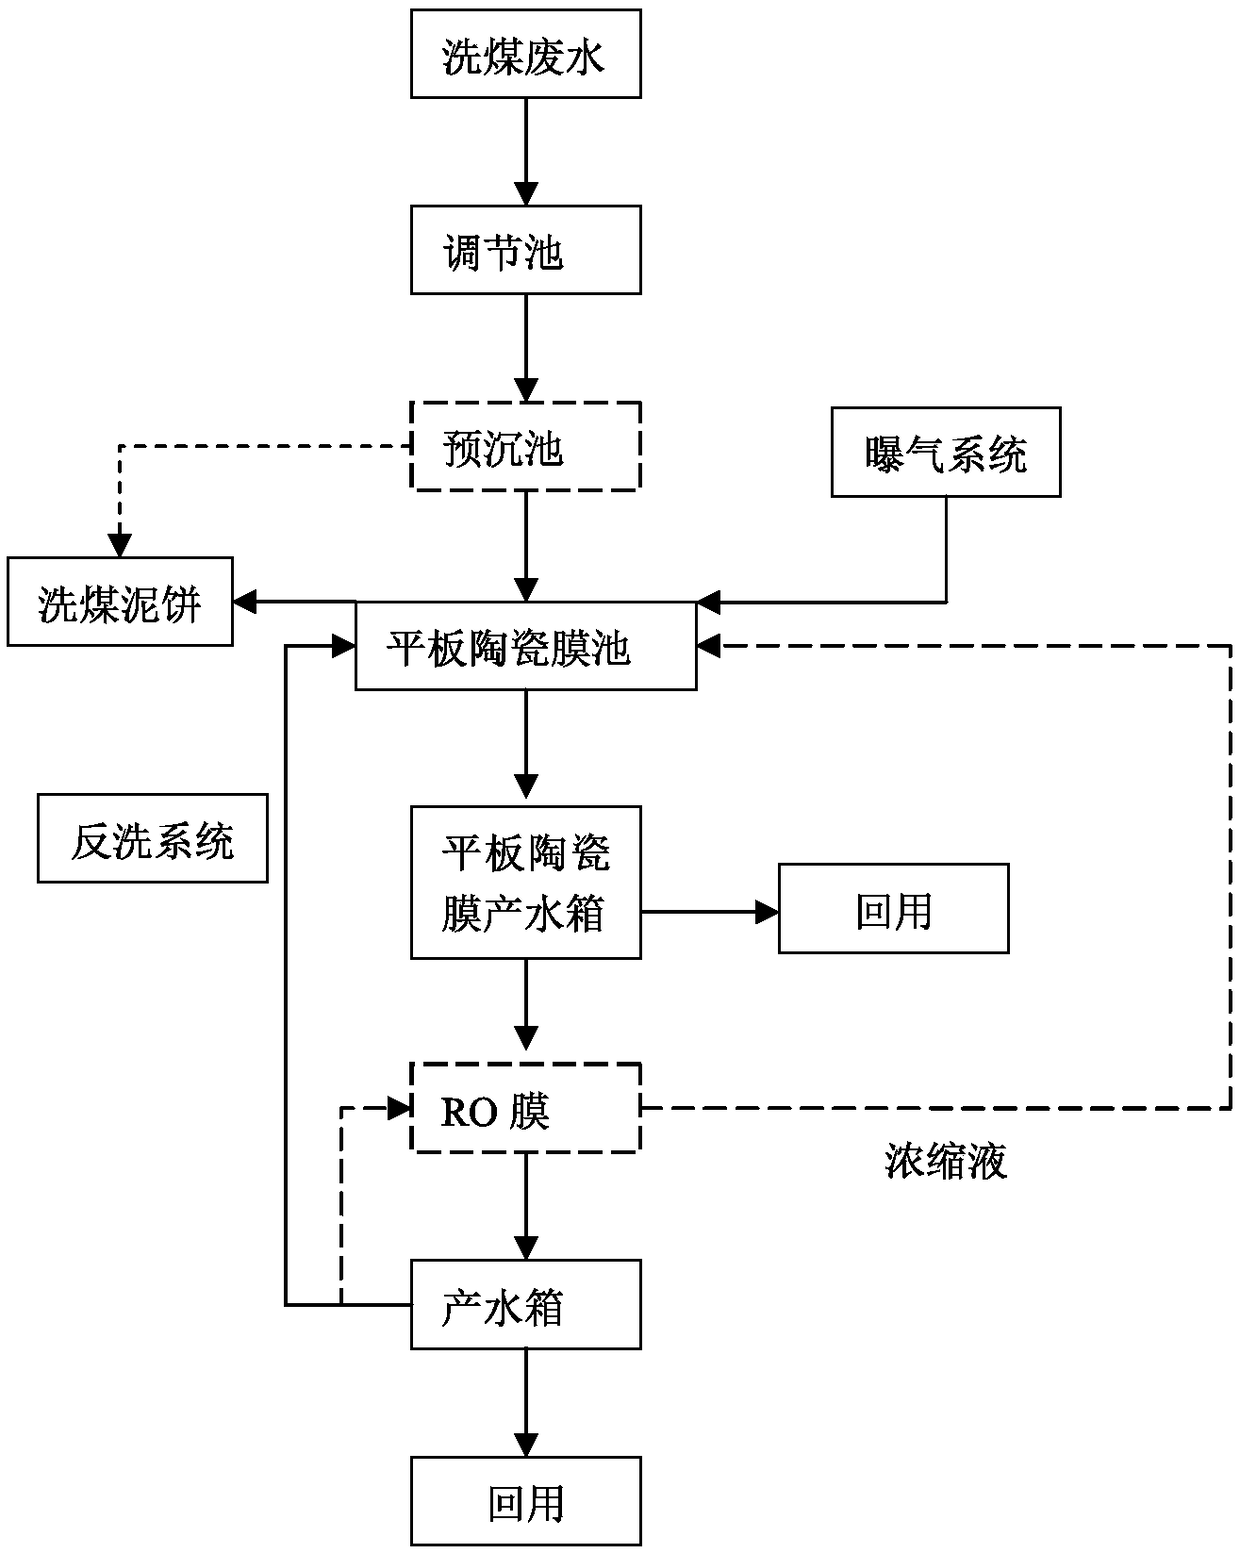 Processing method of coal mine water and/or coal washing waste water